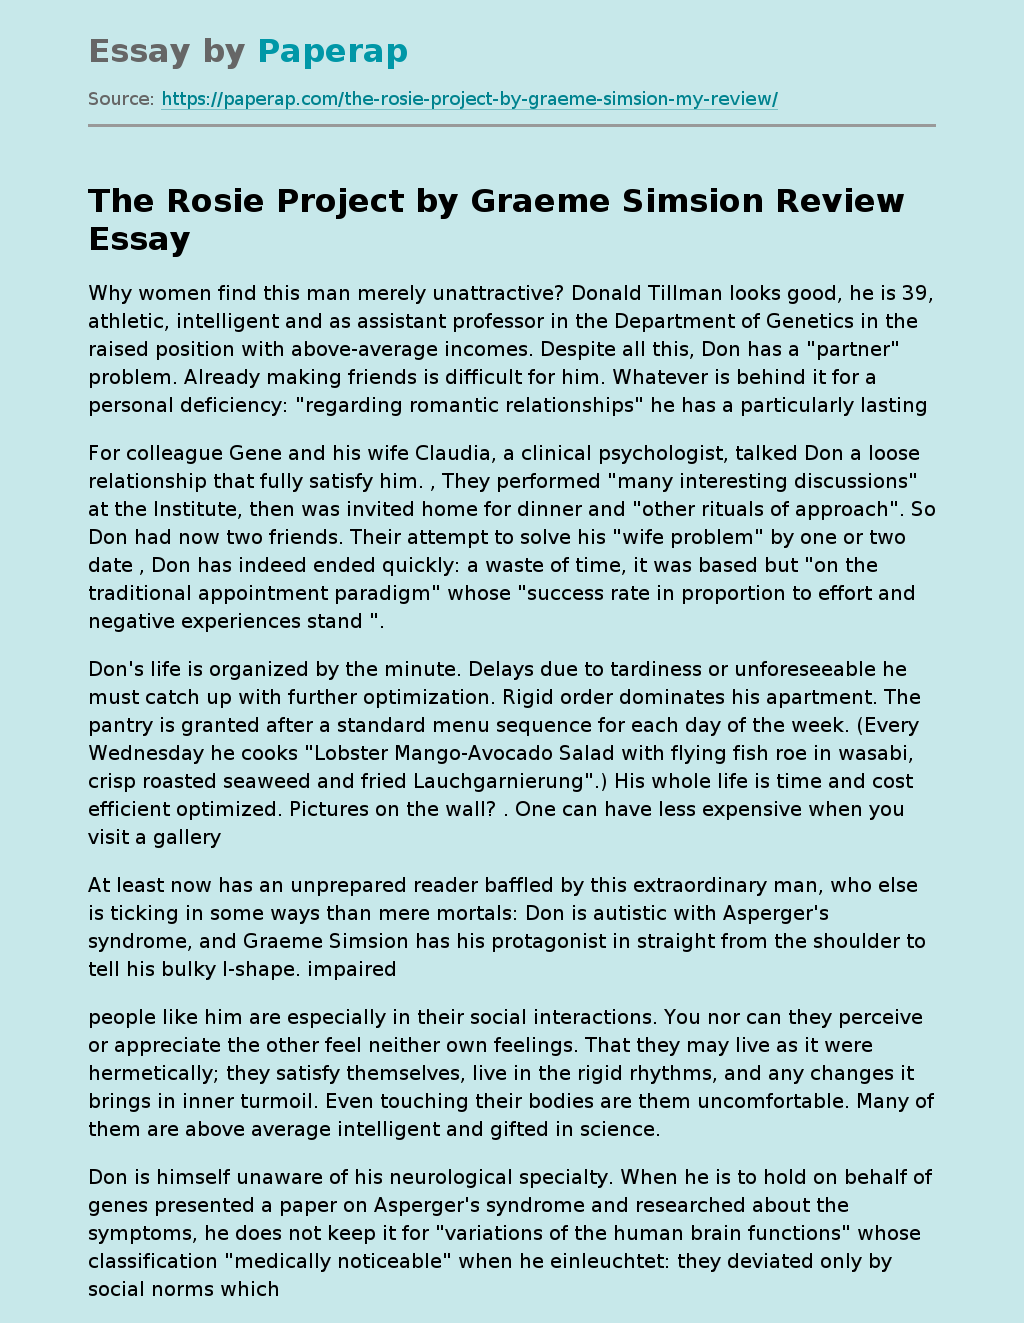 The Rosie Project by Graeme Simsion Review